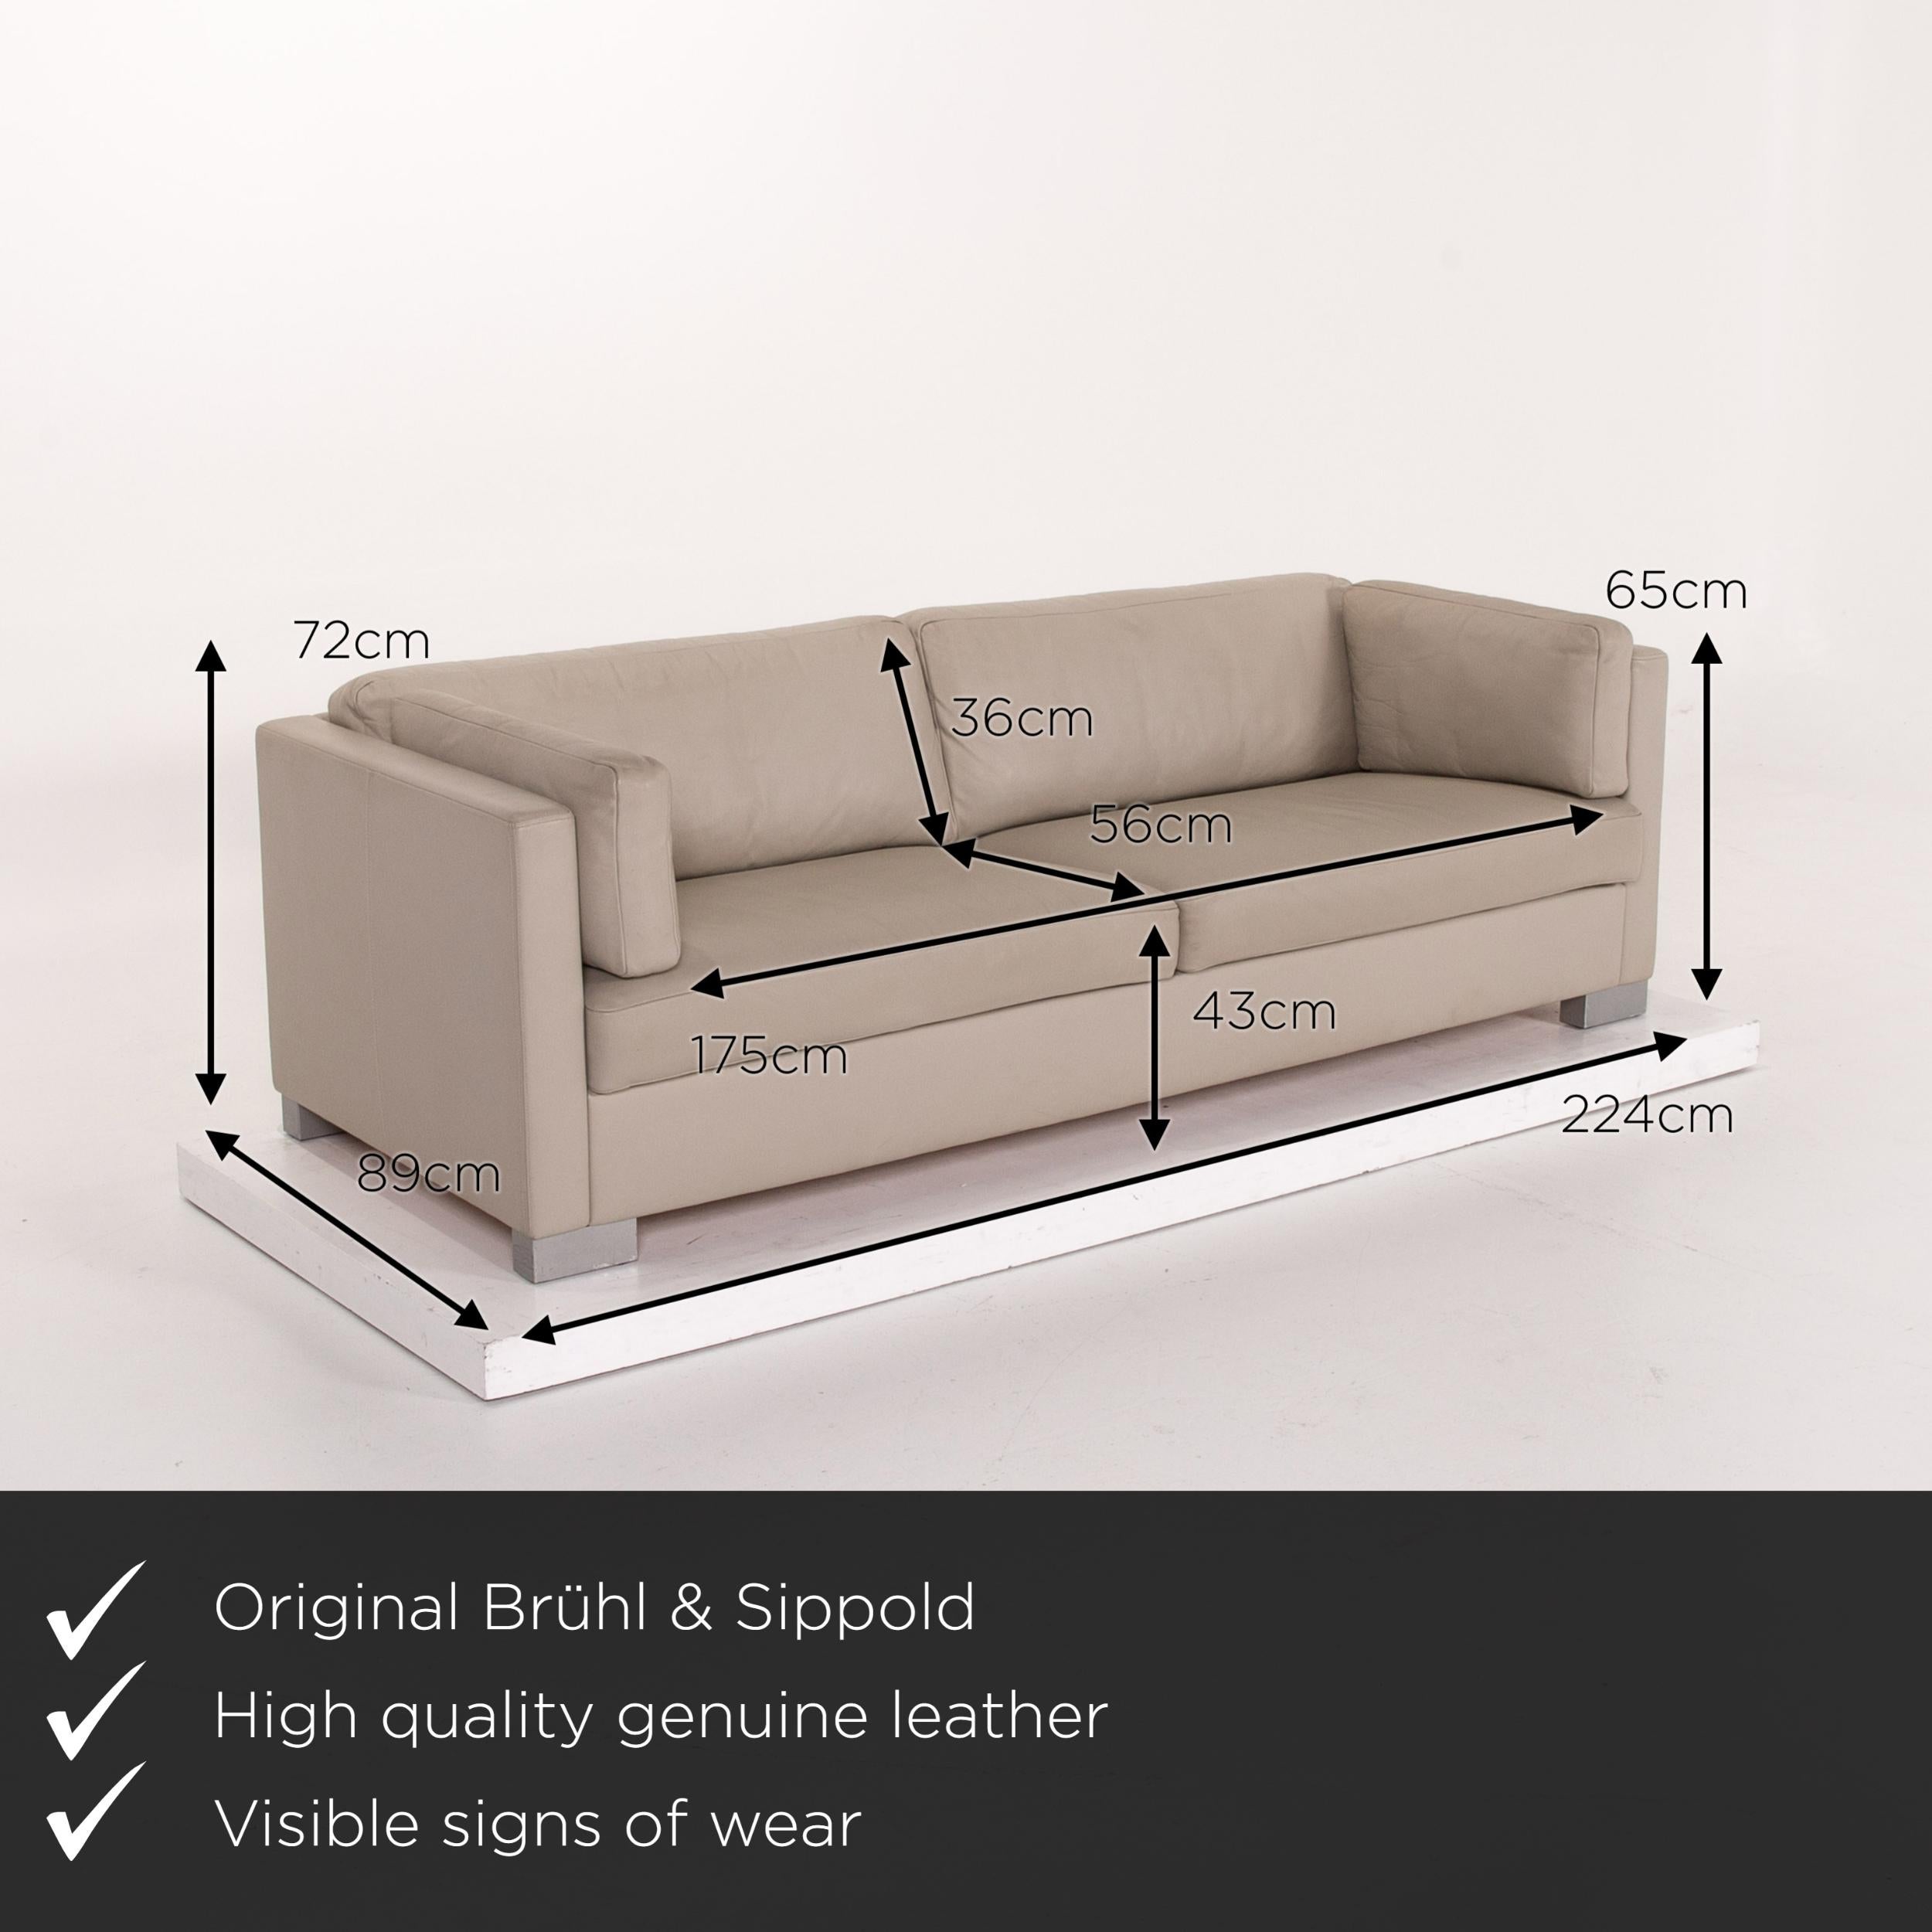 We present to you a Brühl & Sippold leather sofa set gray gray beige 1 three-seat 1 stool.
 

 Product measurements in centimeters:
 

Depth 89
Width 224
Height 72
Seat height 43
Rest height 65
Seat depth 56
Seat width 175
Back height